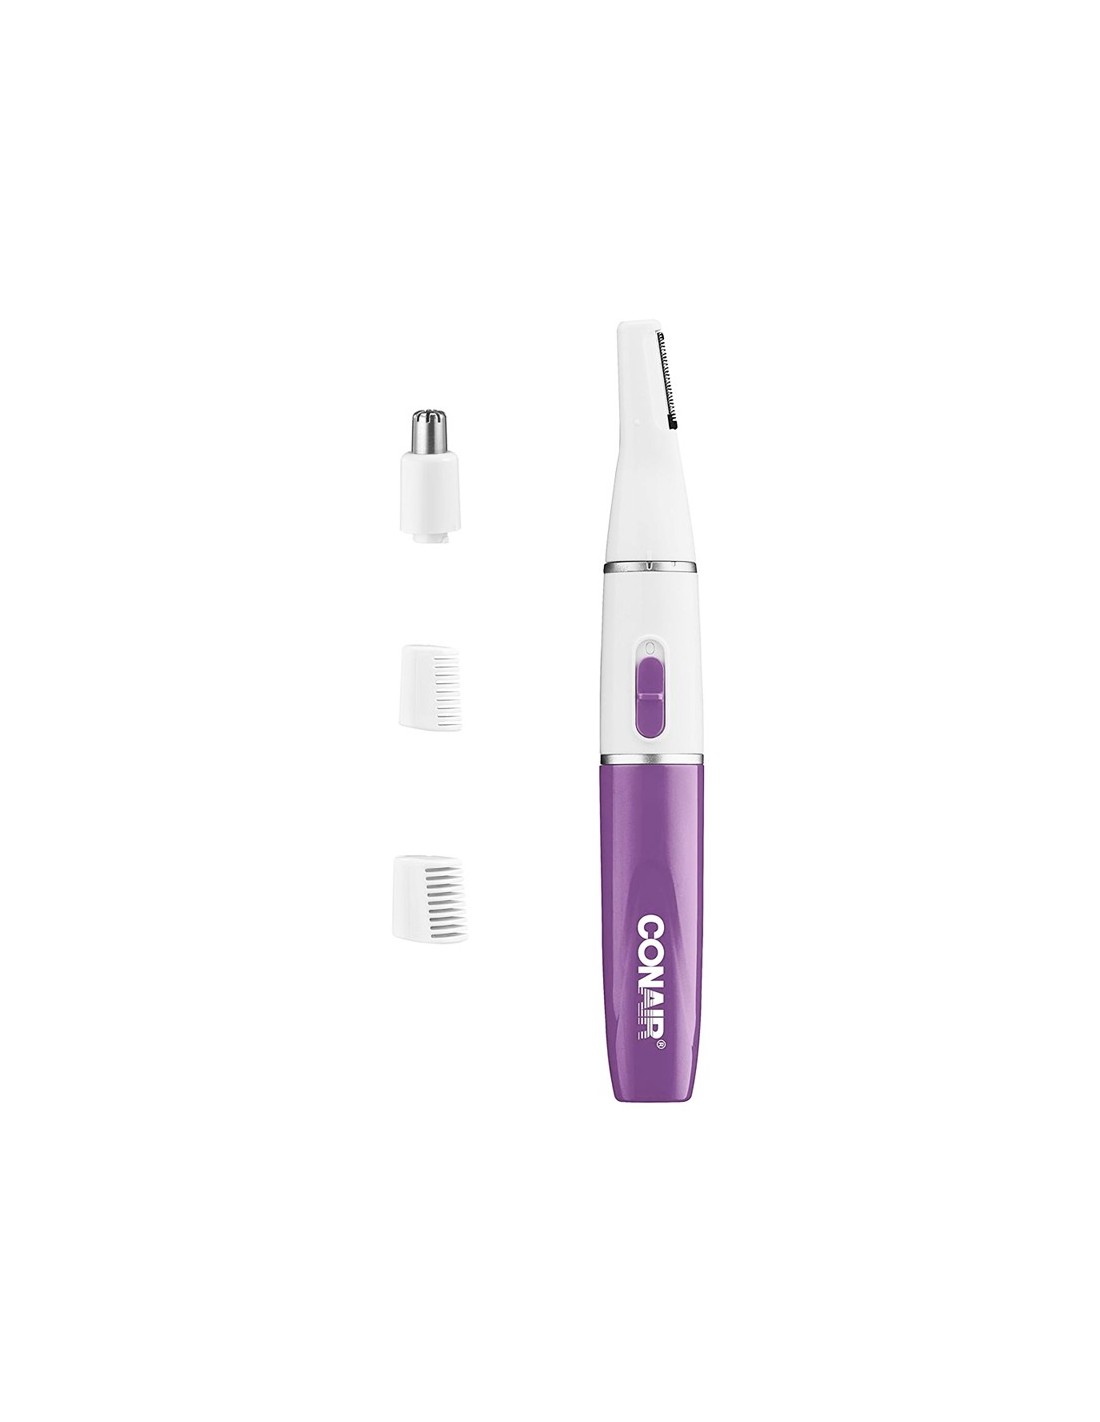 conair true glow all in one personal groomer